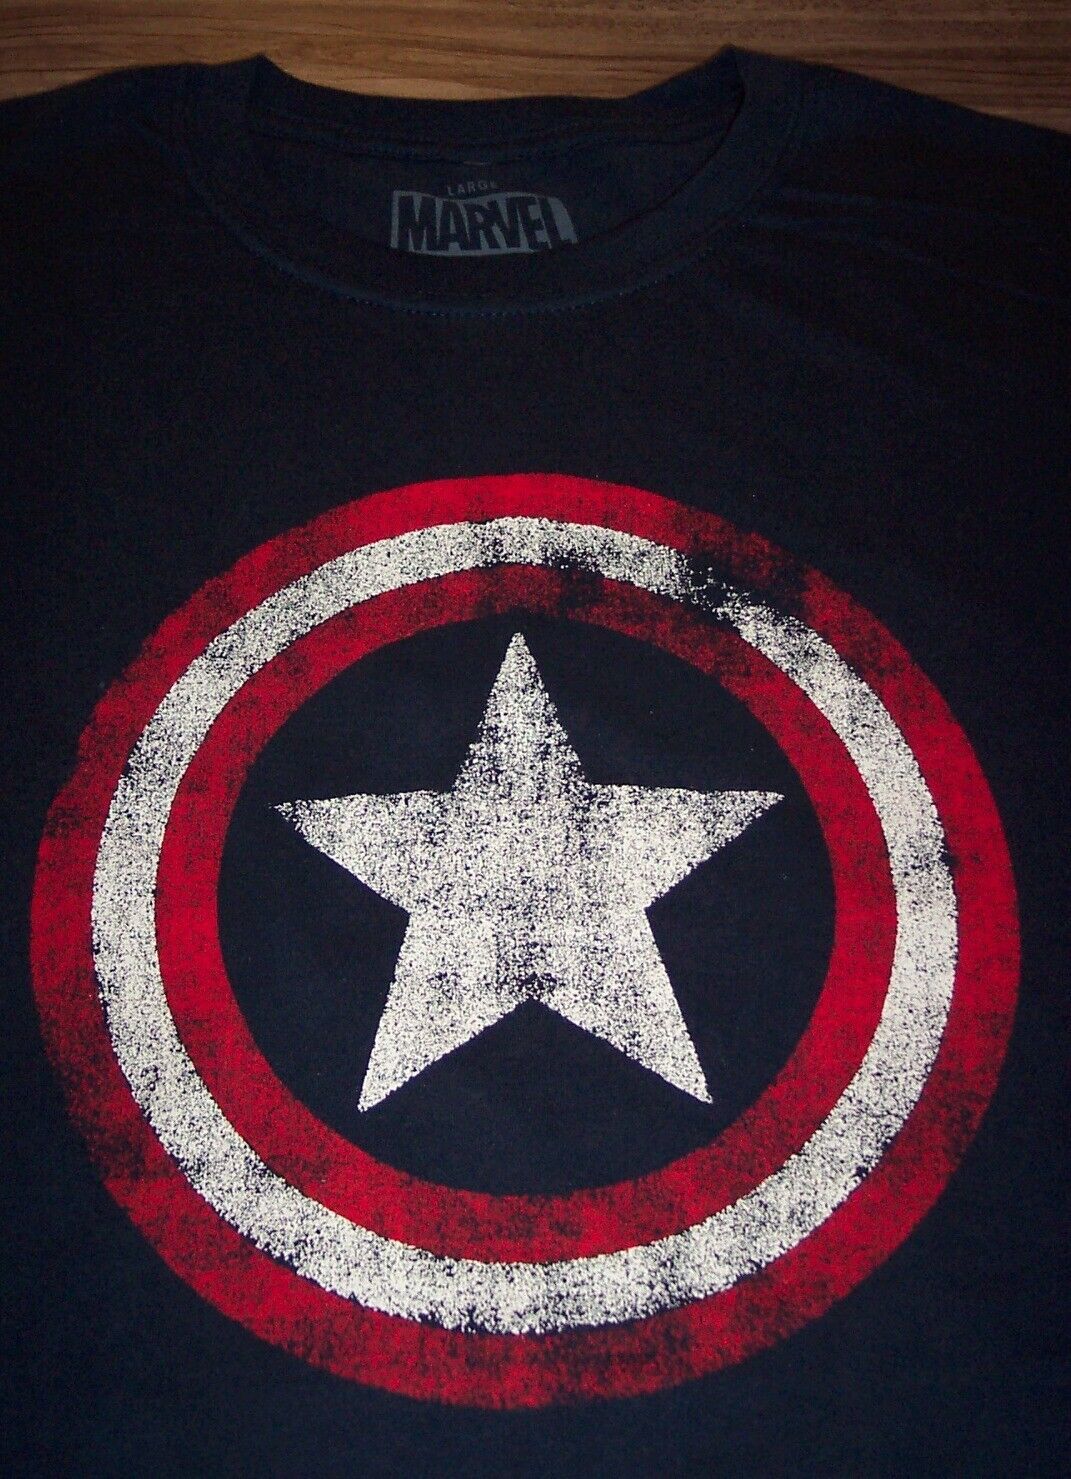 Primary image for Vintage Style Marvel Comics CAPTAIN AMERICA SHIELD T-Shirt LARGE NEW Avengers